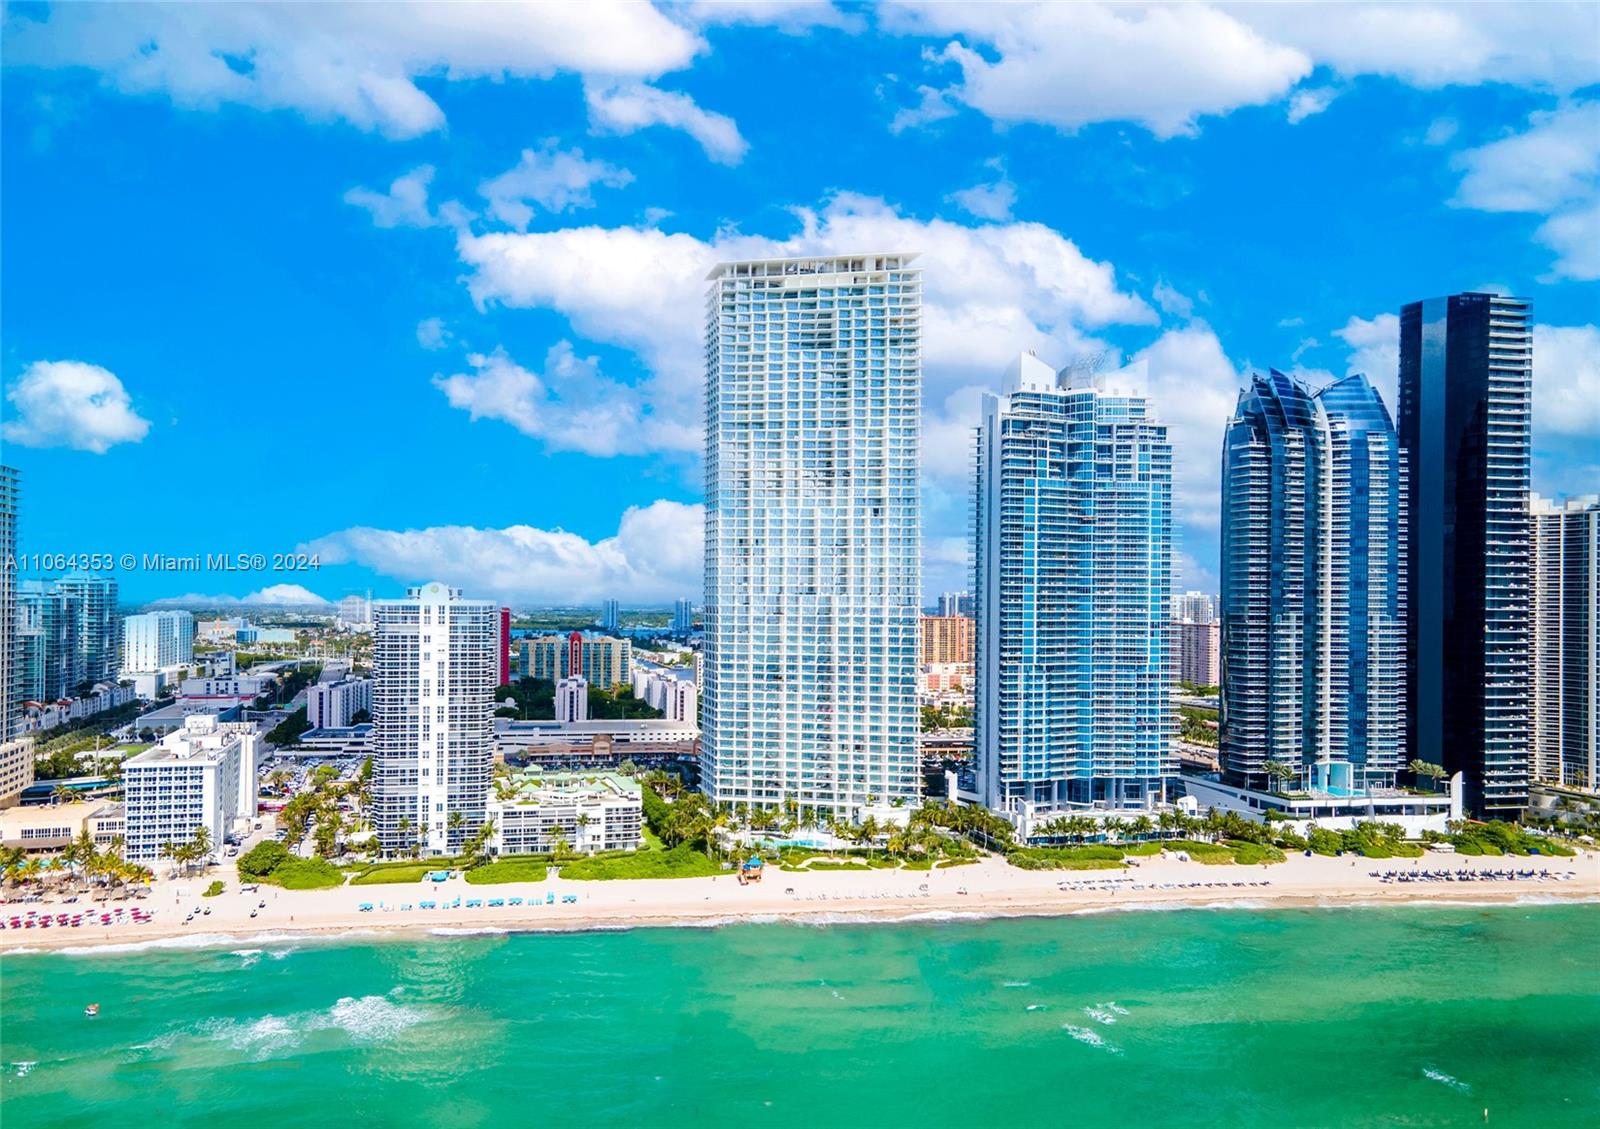 16901 Collins Ave 2603, Sunny Isles Beach, Florida 33160, 3 Bedrooms Bedrooms, ,4 BathroomsBathrooms,Residential,For Sale,16901 Collins Ave 2603,A11064353